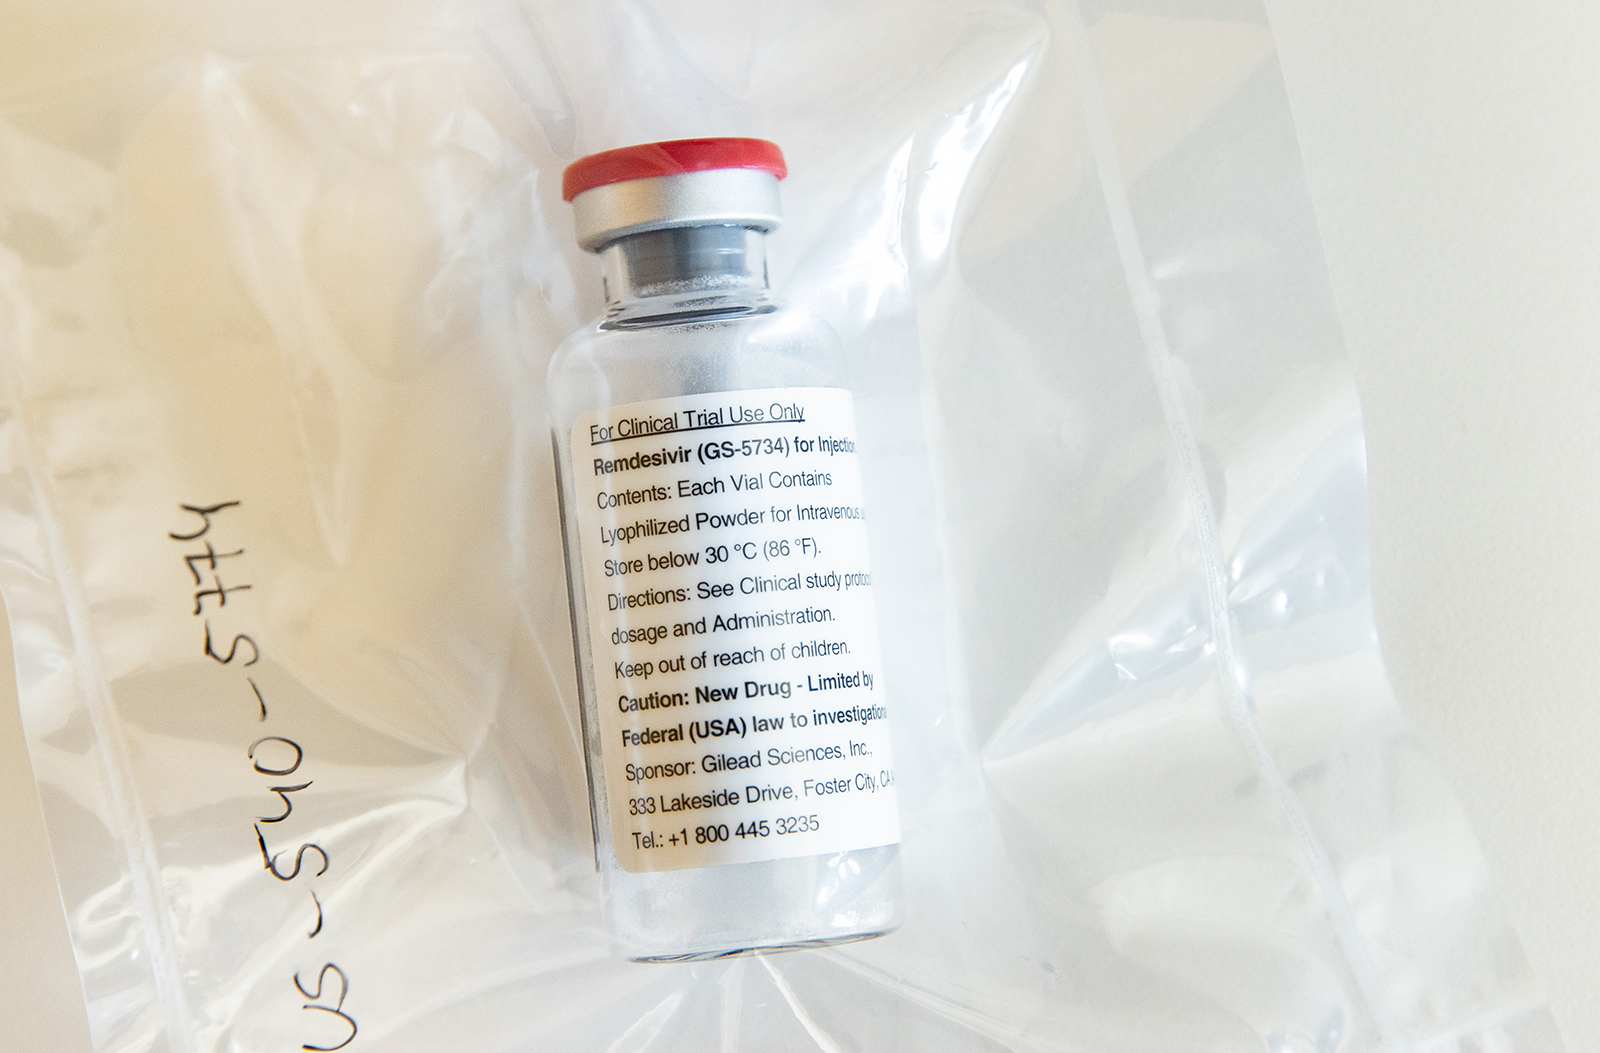 An ampoule of the drug Remdesivir is on the table during a press conference at the University Hospital Eppendorf (UKE) in Hamburg, Germany on April 8.